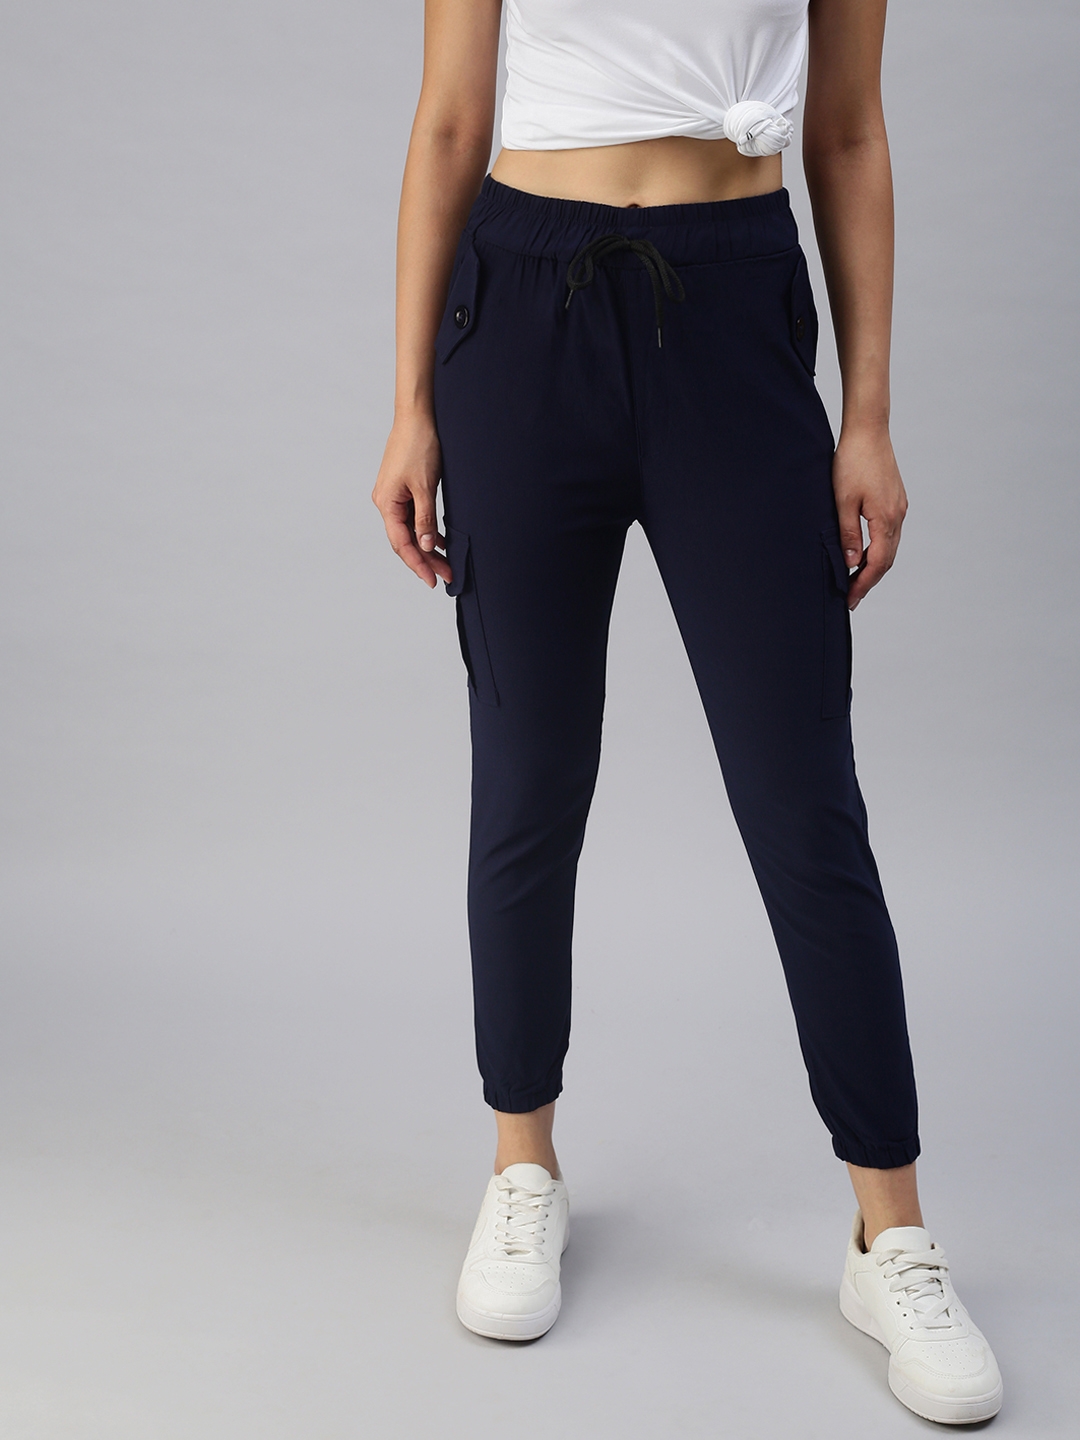 SHOWOFF Women's Solid High-Rise Navy Blue Jogger